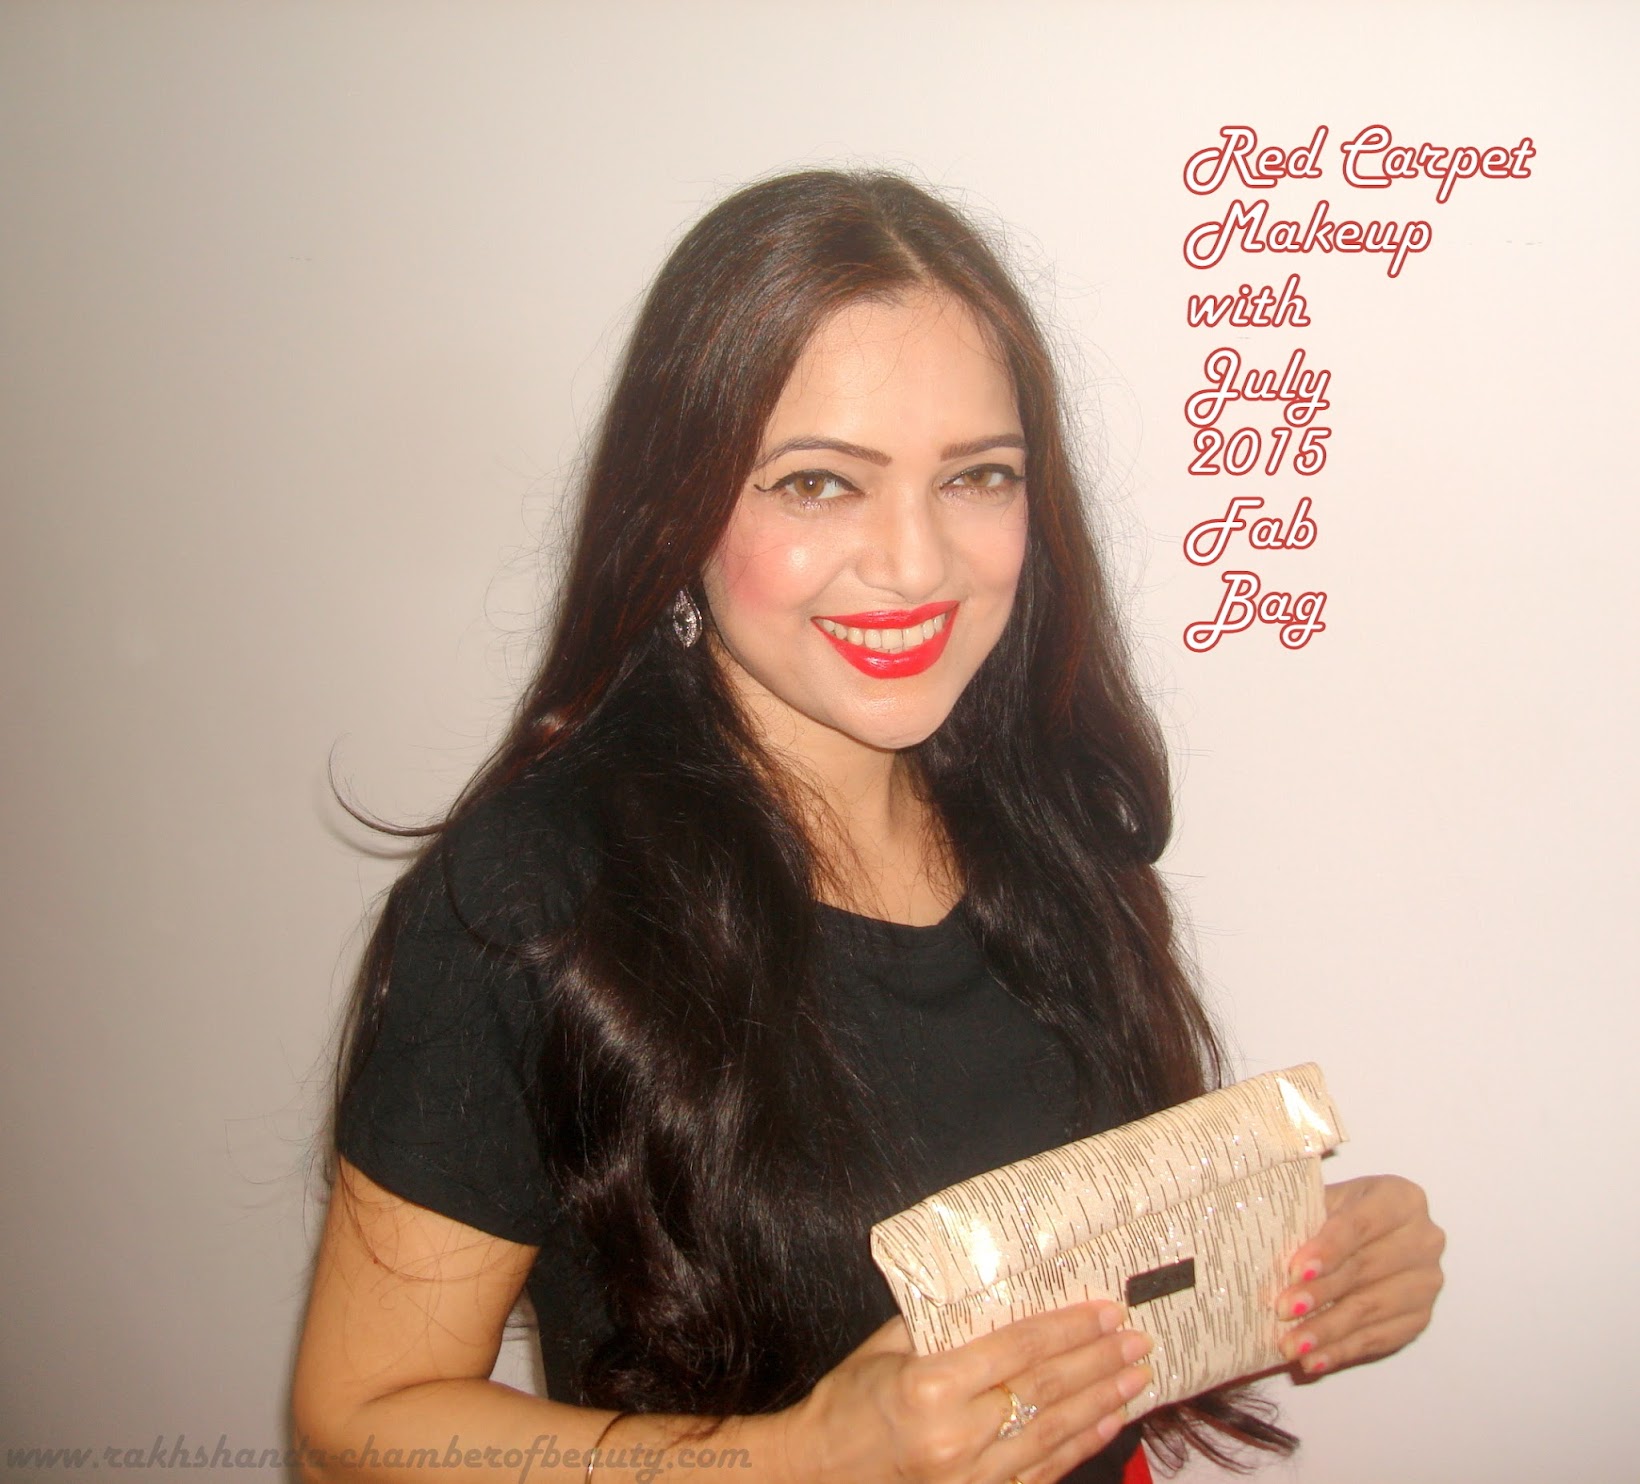 Red carpet makeup with July 2015 Fab Bag, classic makeup, classic winged eyeliner, date night makeup, Fab Bag, indian beauty blog, july fab bag red carpet, makeup, makeup for red lips, how to do a red carpet makeup, red lips, vintage makeup